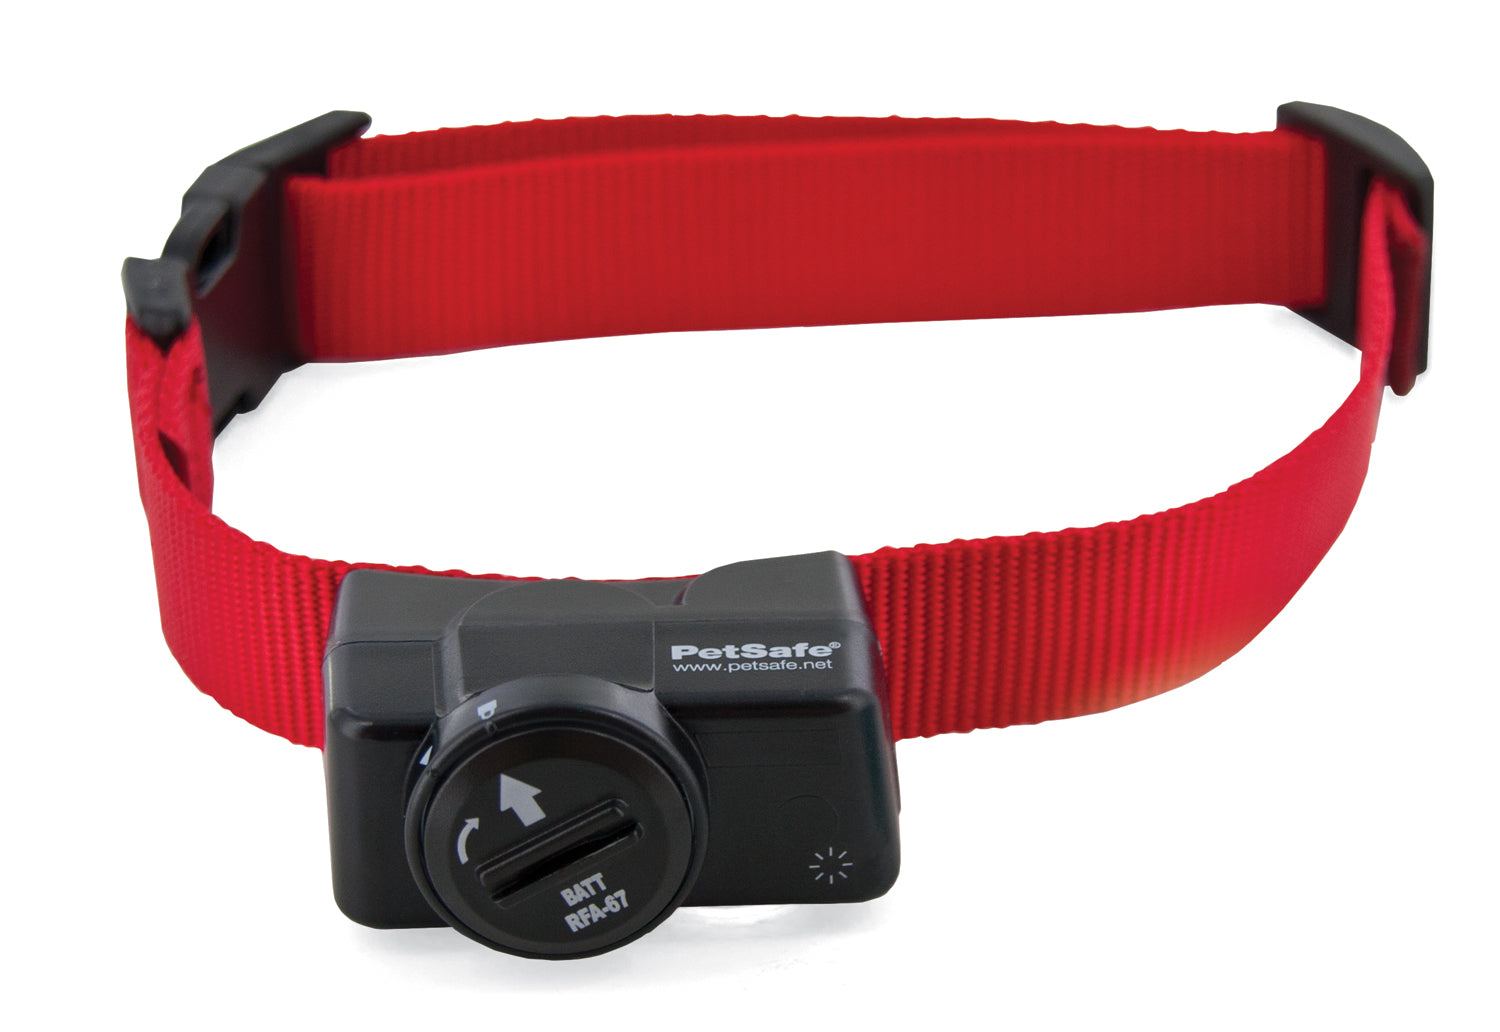 PetSafe Extra Wireless Fence Receiver Collar - CountryMax